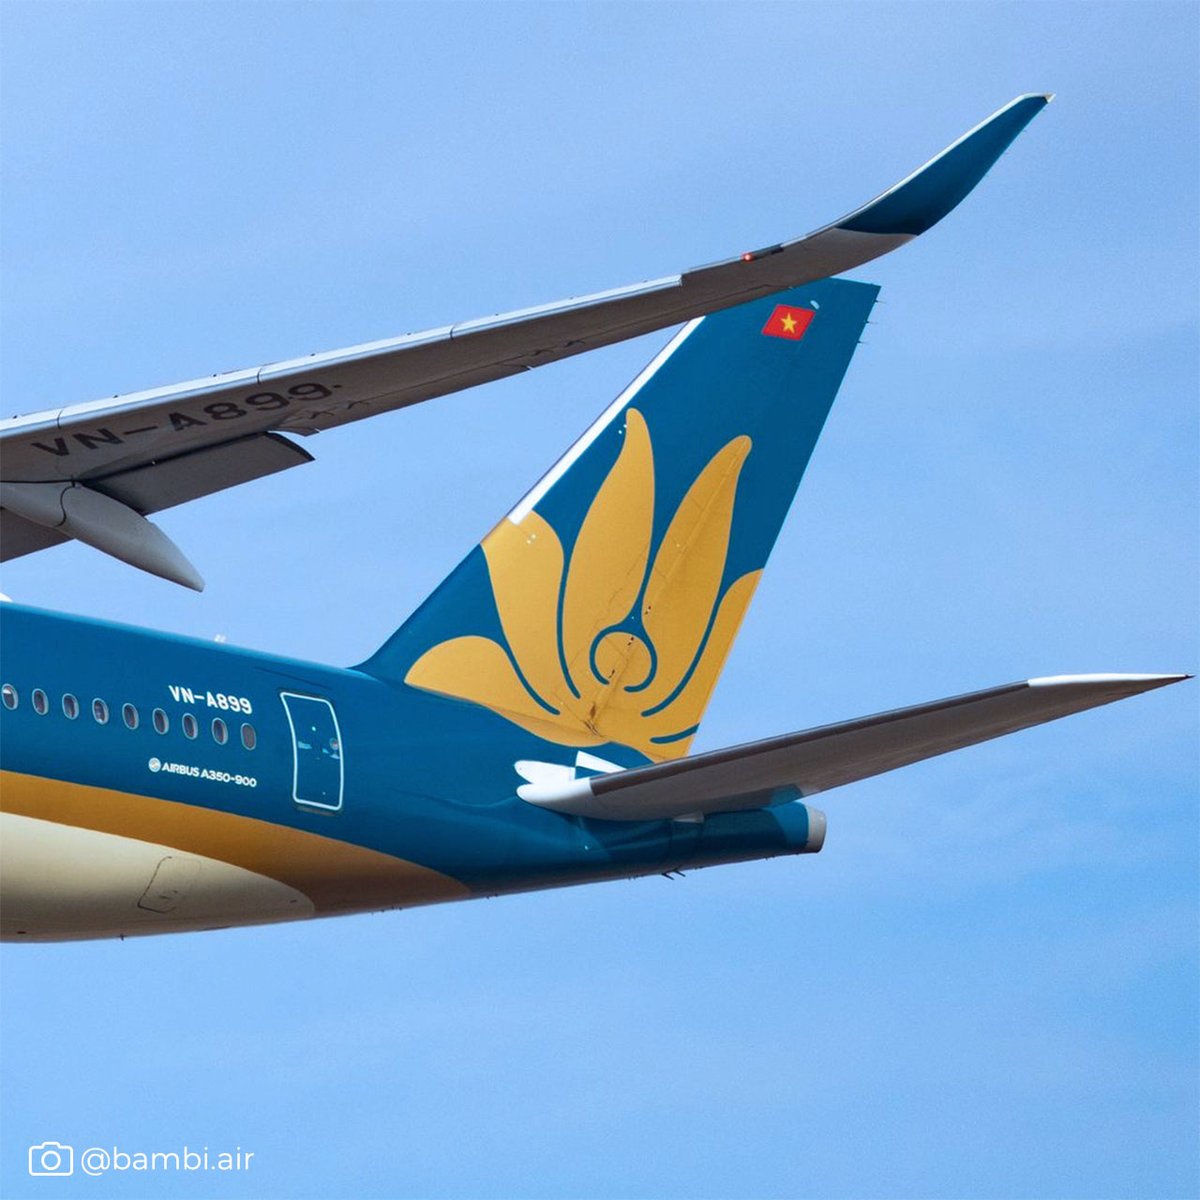 Tales from the Tail! Did you know the tail of Vietnam Airlines' airplanes feature a golden lotus, which is Vietnam's national flower. The lotus symbolizes purity, commitment and optimism for the future, reflecting the airline's brand and cultural heritage. #SkyTeam #Aviation